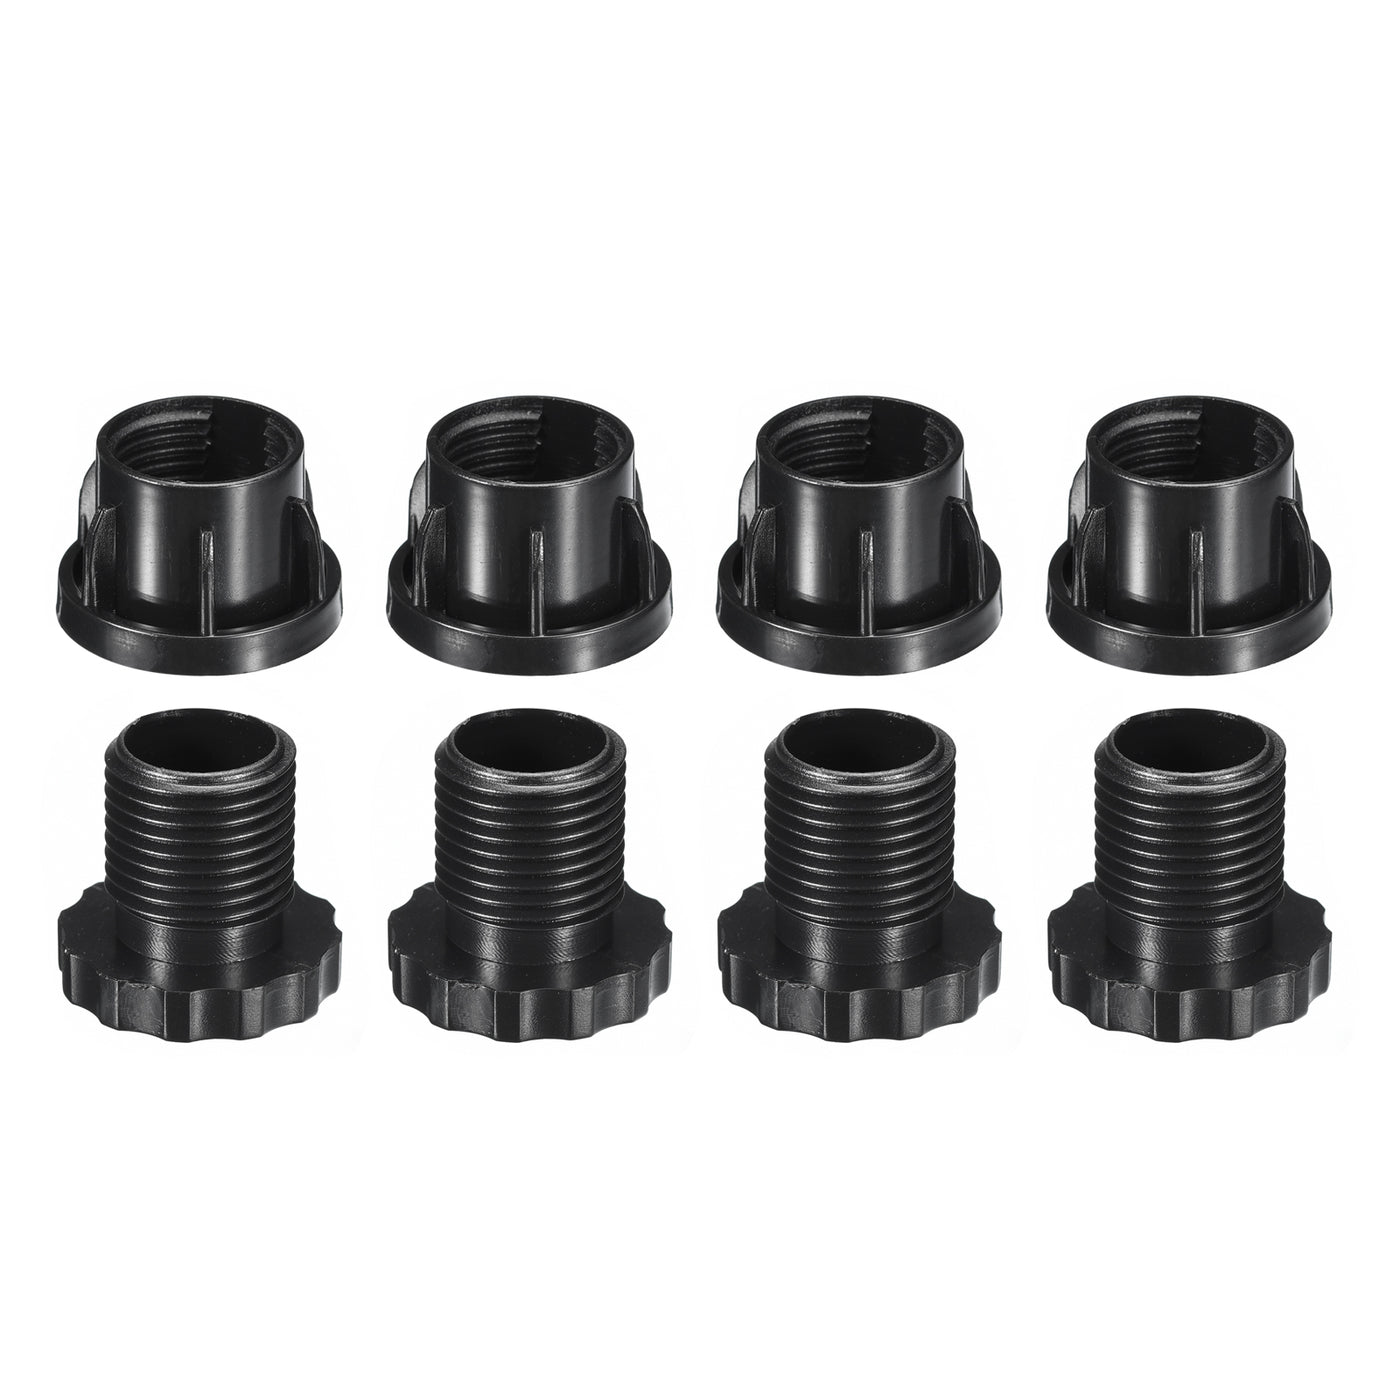 uxcell Uxcell 4Pcs Inserts for Round Tubes with Leveling Feet, for 30mm/1.18" Dia Round Tube